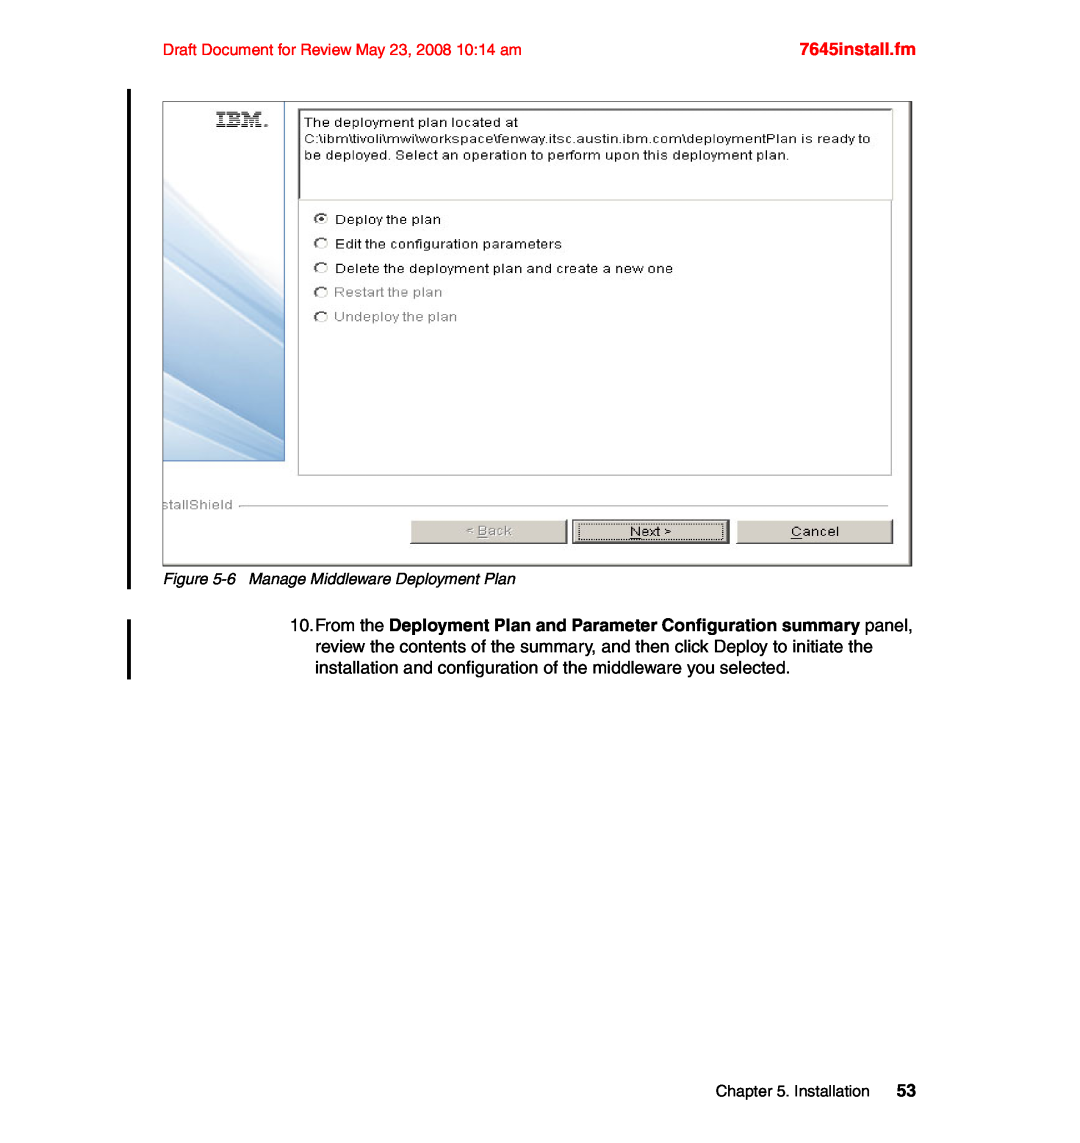 IBM SG24-7645-00 manual 7645install.fm, Draft Document for Review May 23, 2008 10 14 am, 6Manage Middleware Deployment Plan 